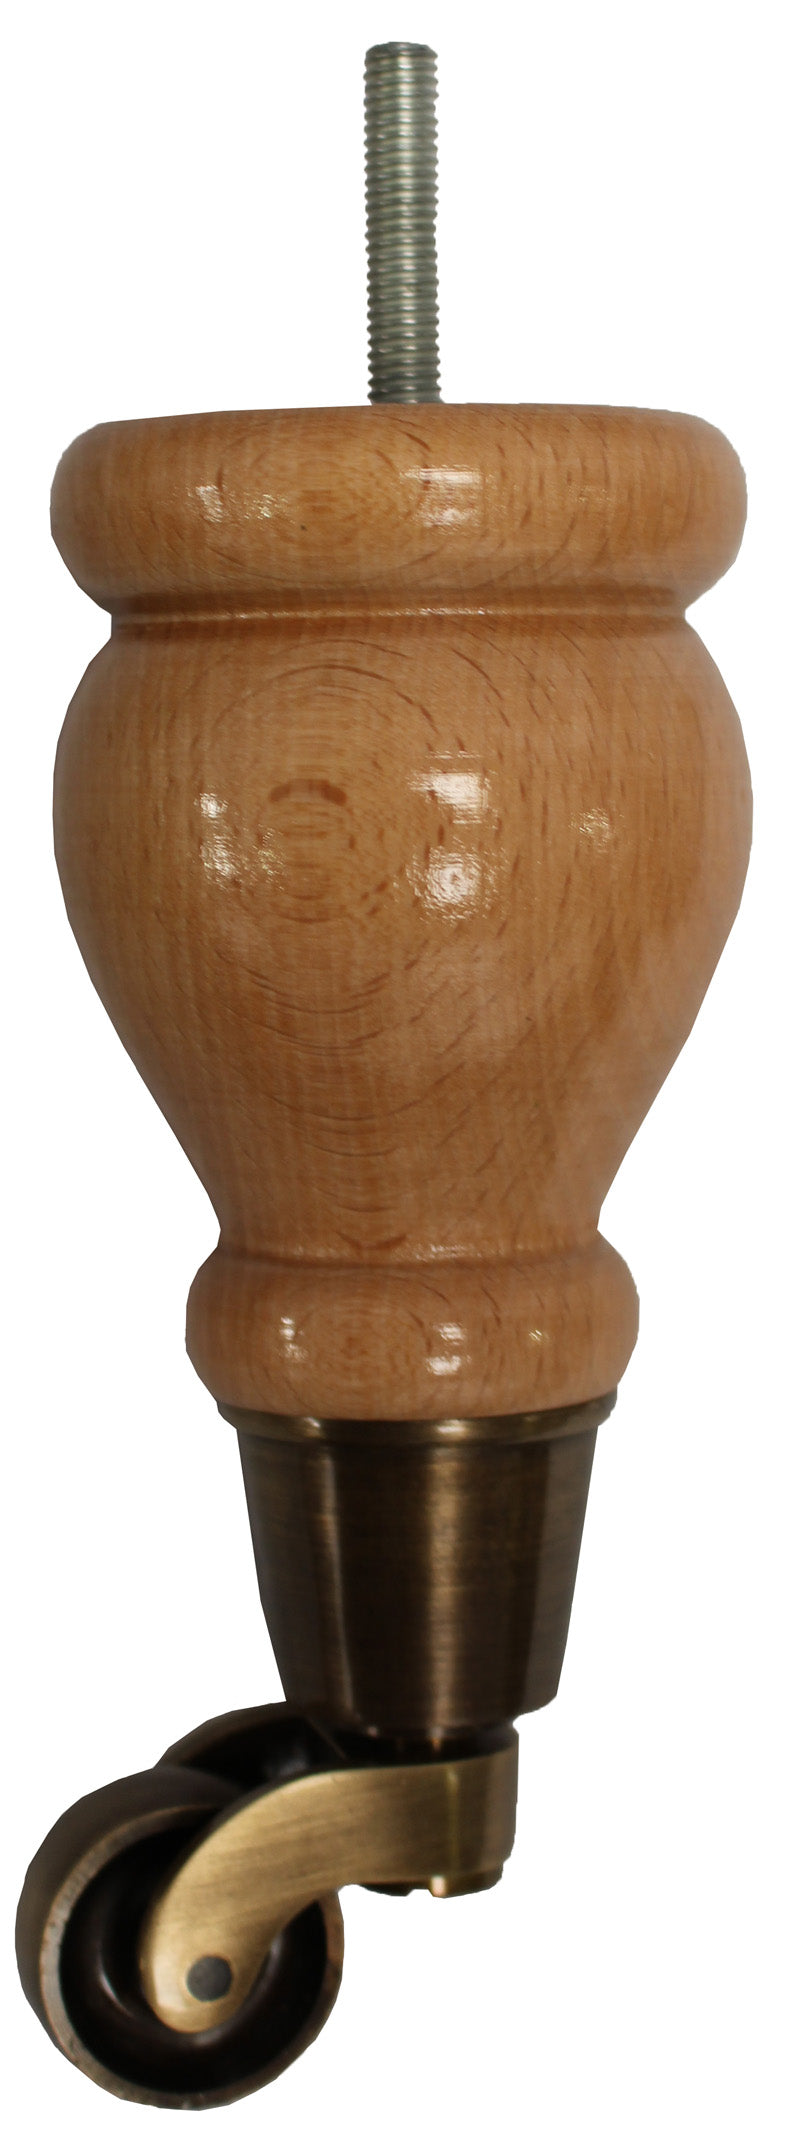 Ivy Classic Wooden Furniture Legs with Castors